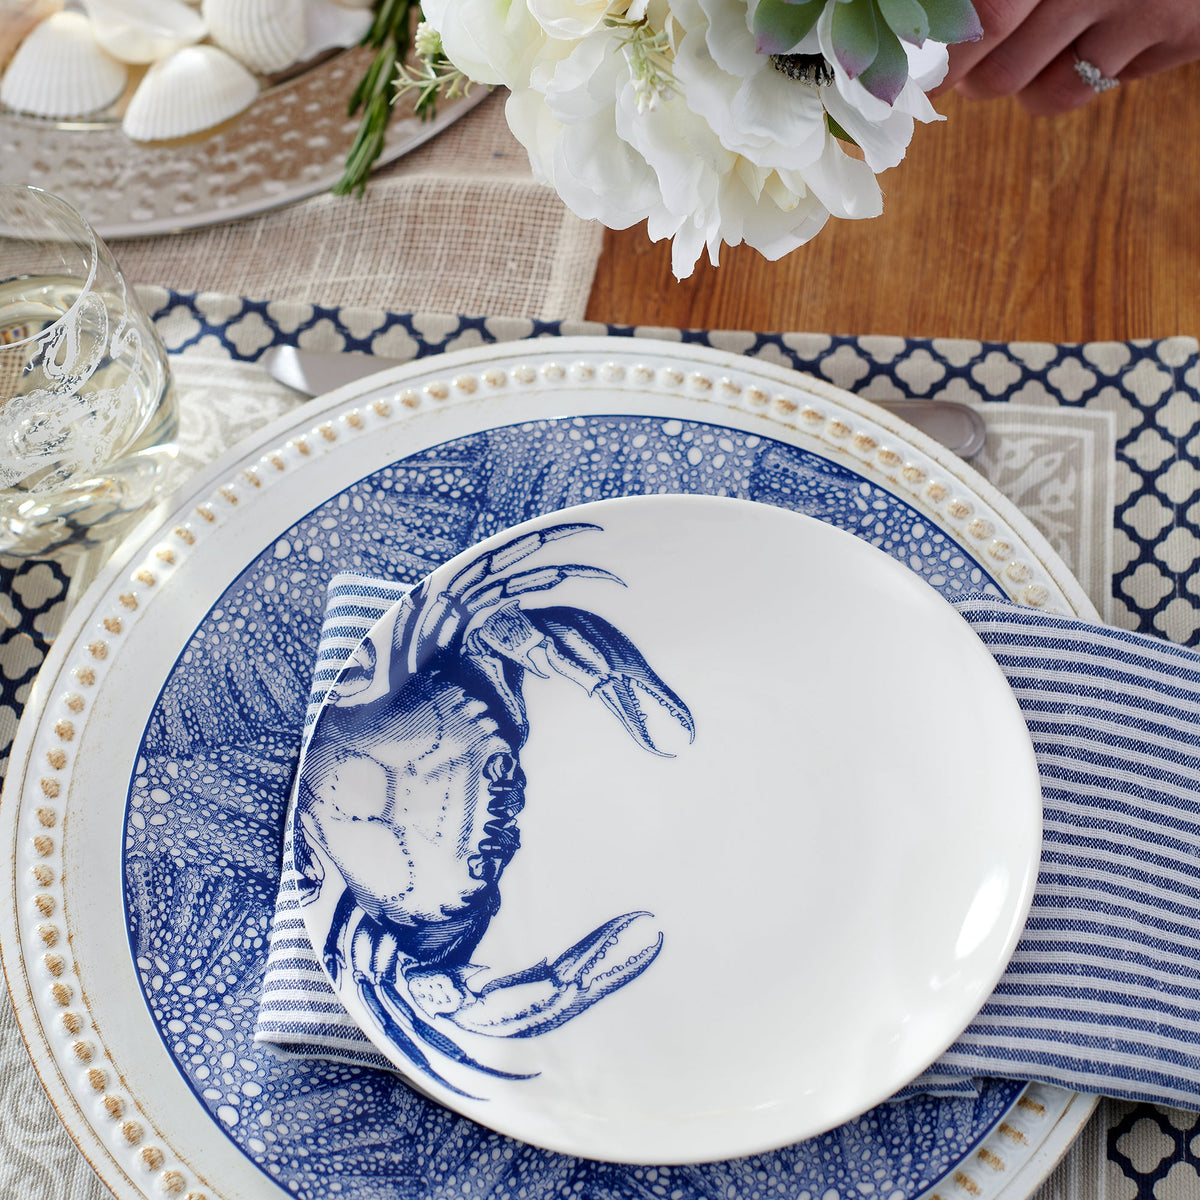 A high-fired porcelain Crab Blue Canapé Plate with a crab on it, perfect for coastal style or to create a seaside vibe.